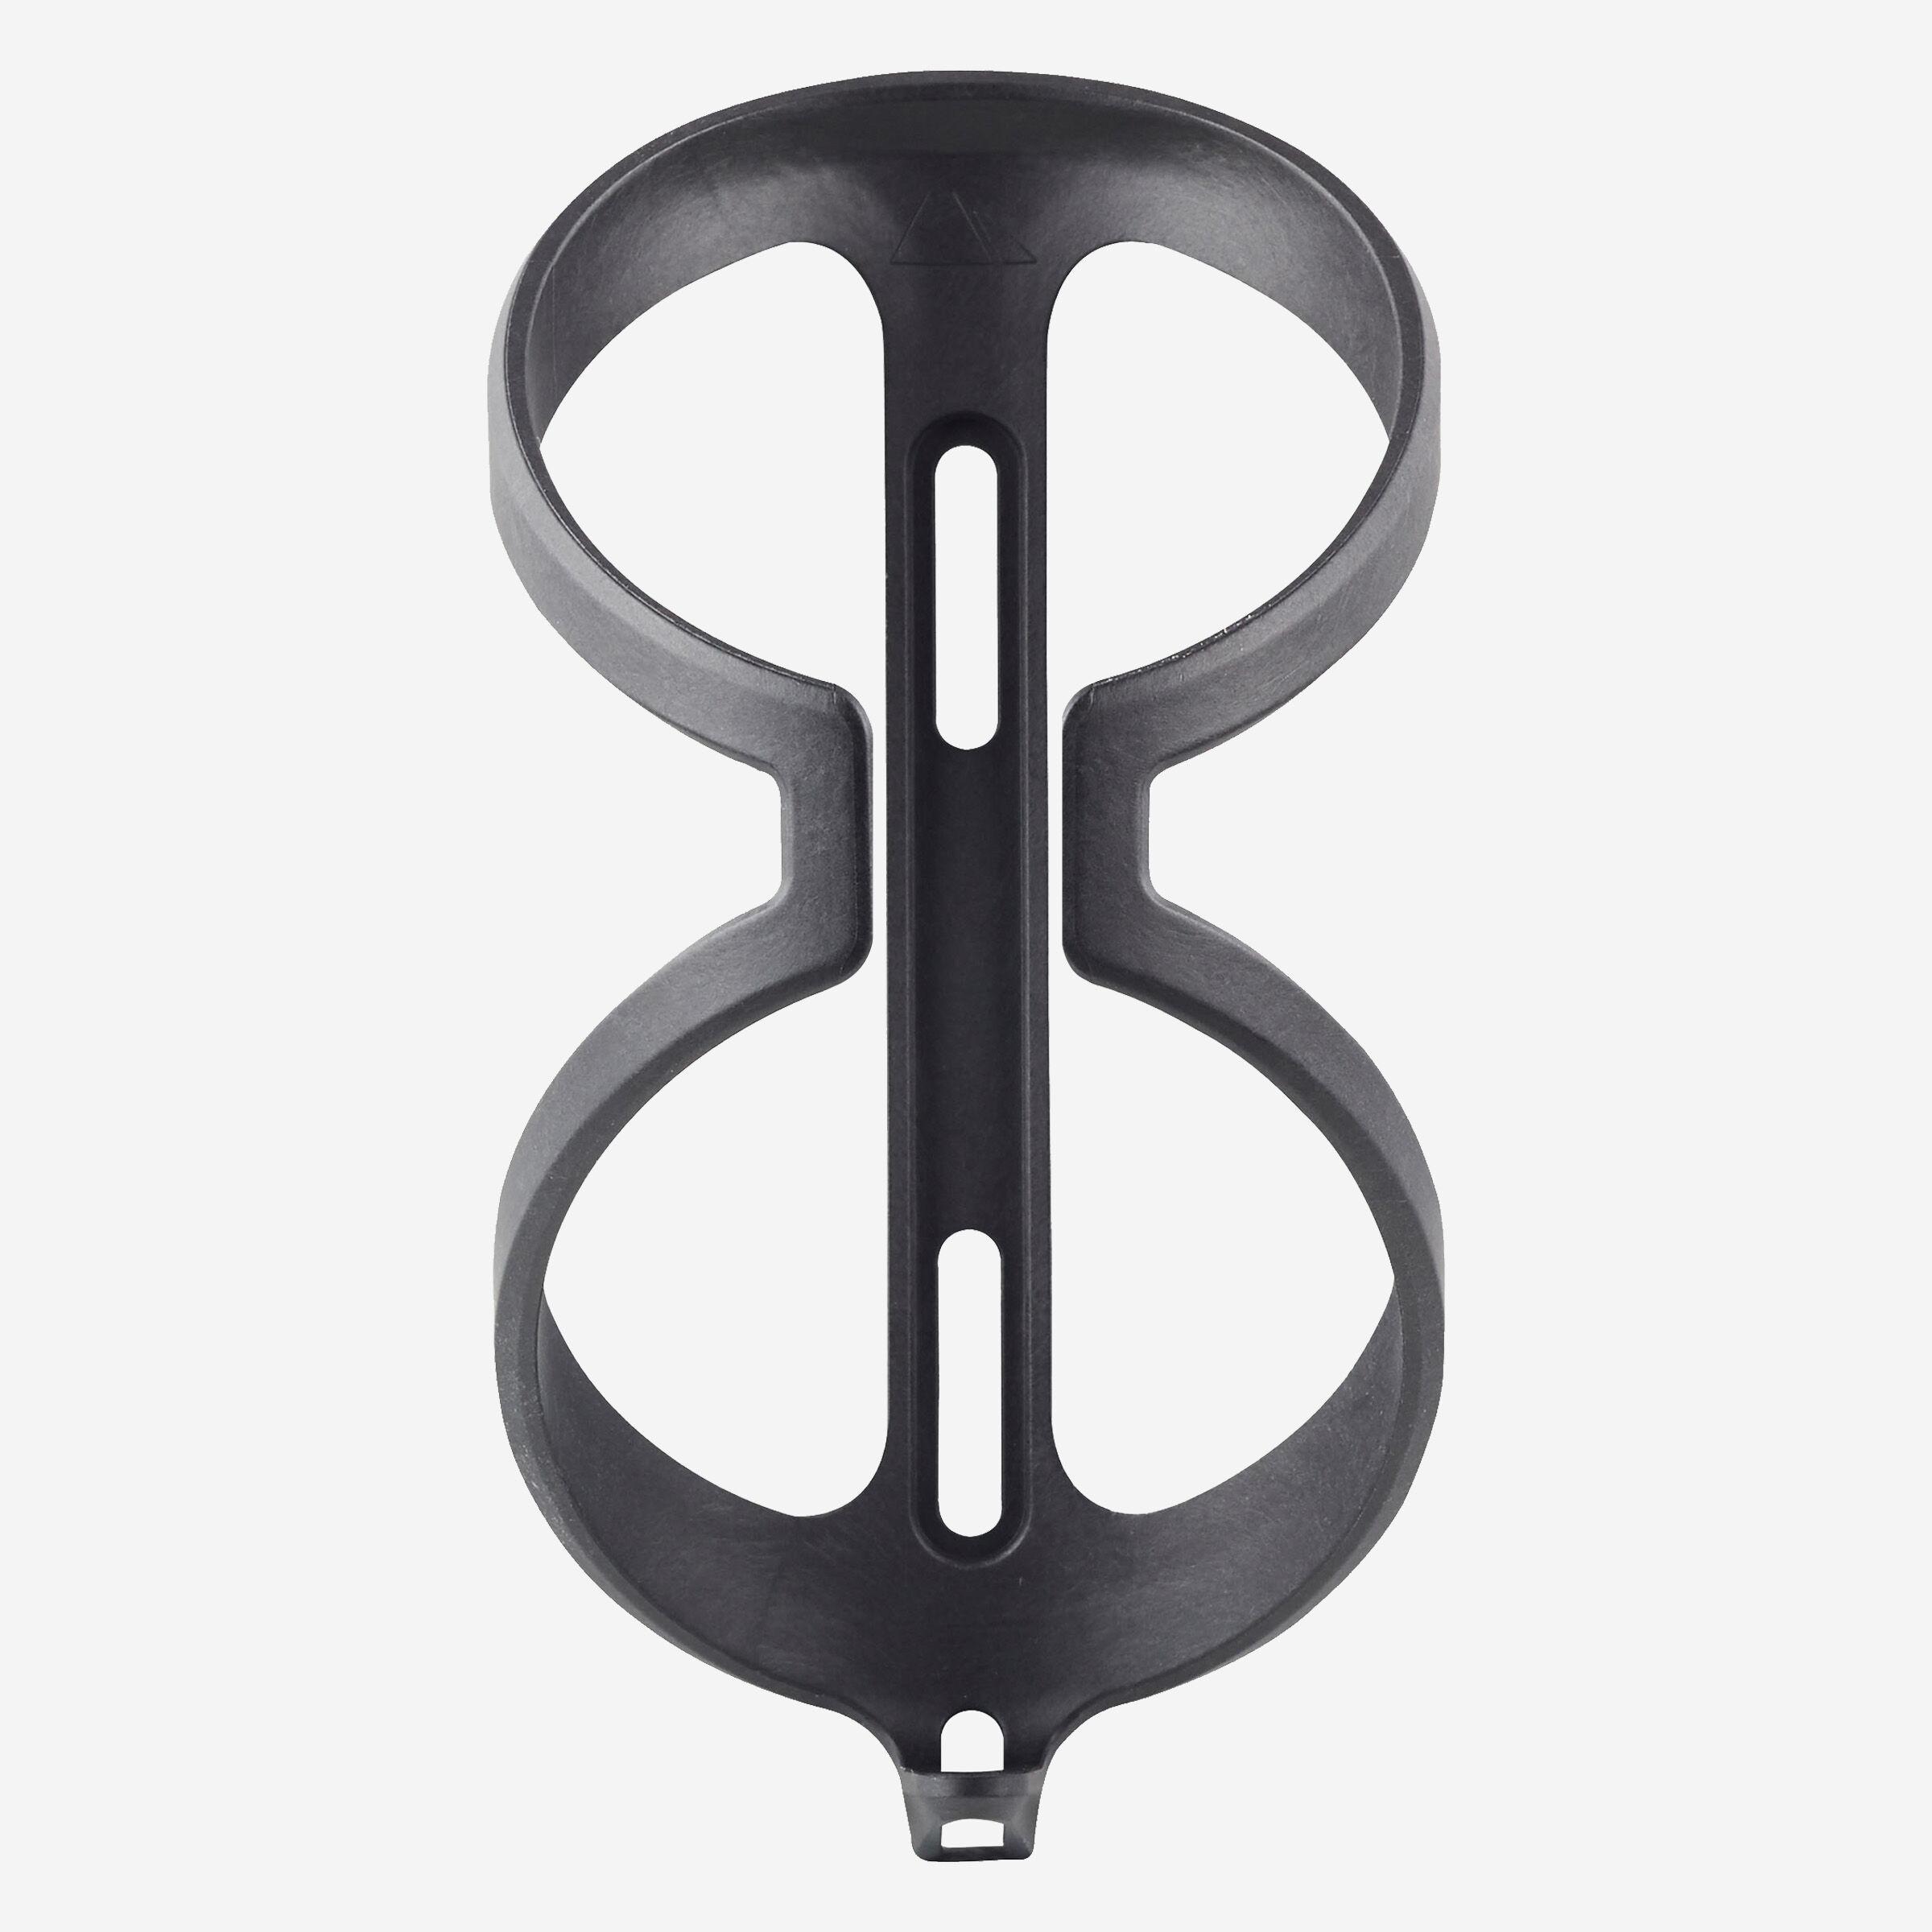 Canyon Carbon Bottle Cage | CANYON US